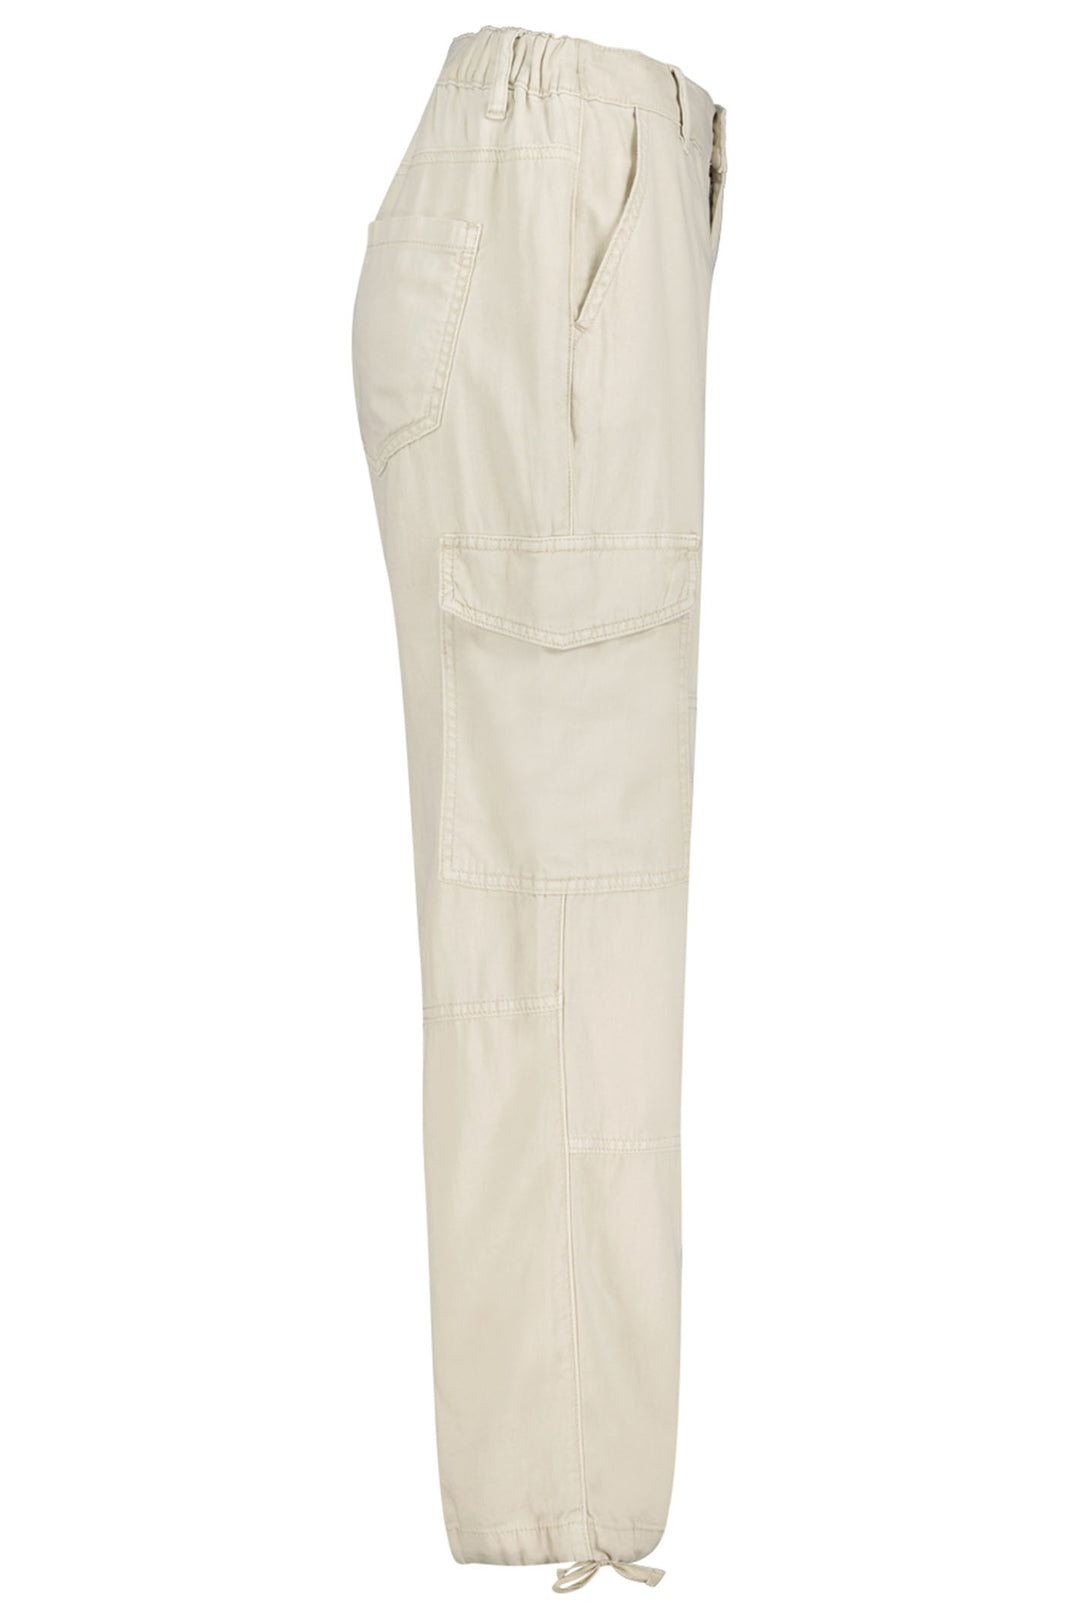 Red Button SRB4167 Conny Pearl Beige Cotton Linen High Rise Loose Fit Cargo Trousers - Dotique